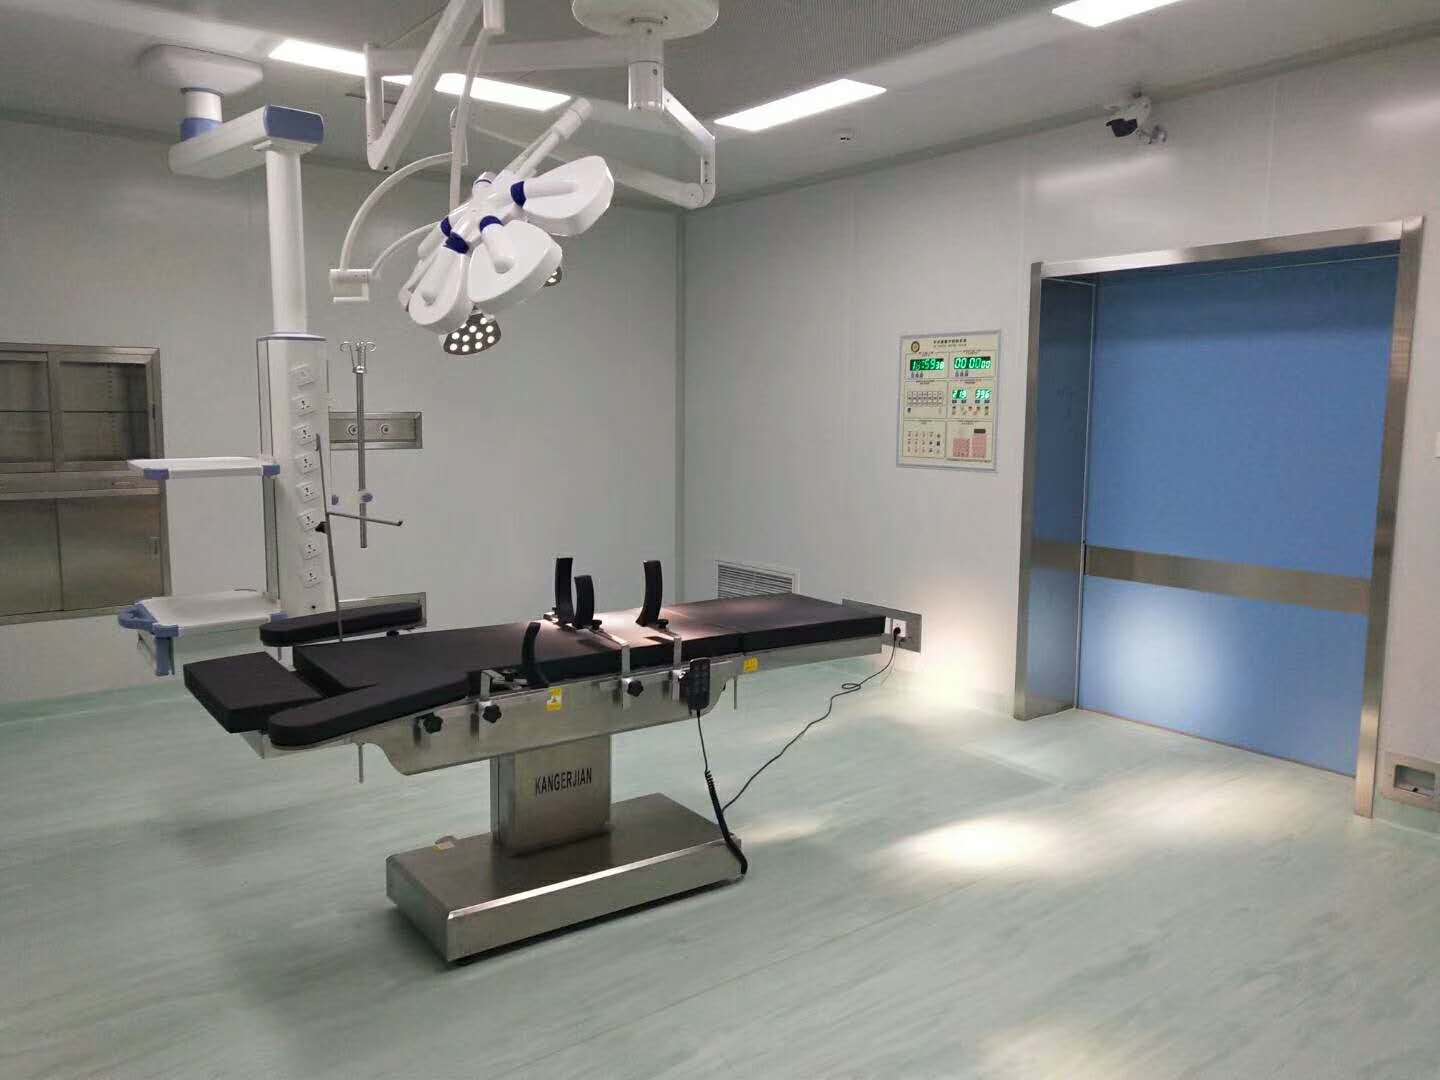 Purification system of Qinghai laminar flow operating room